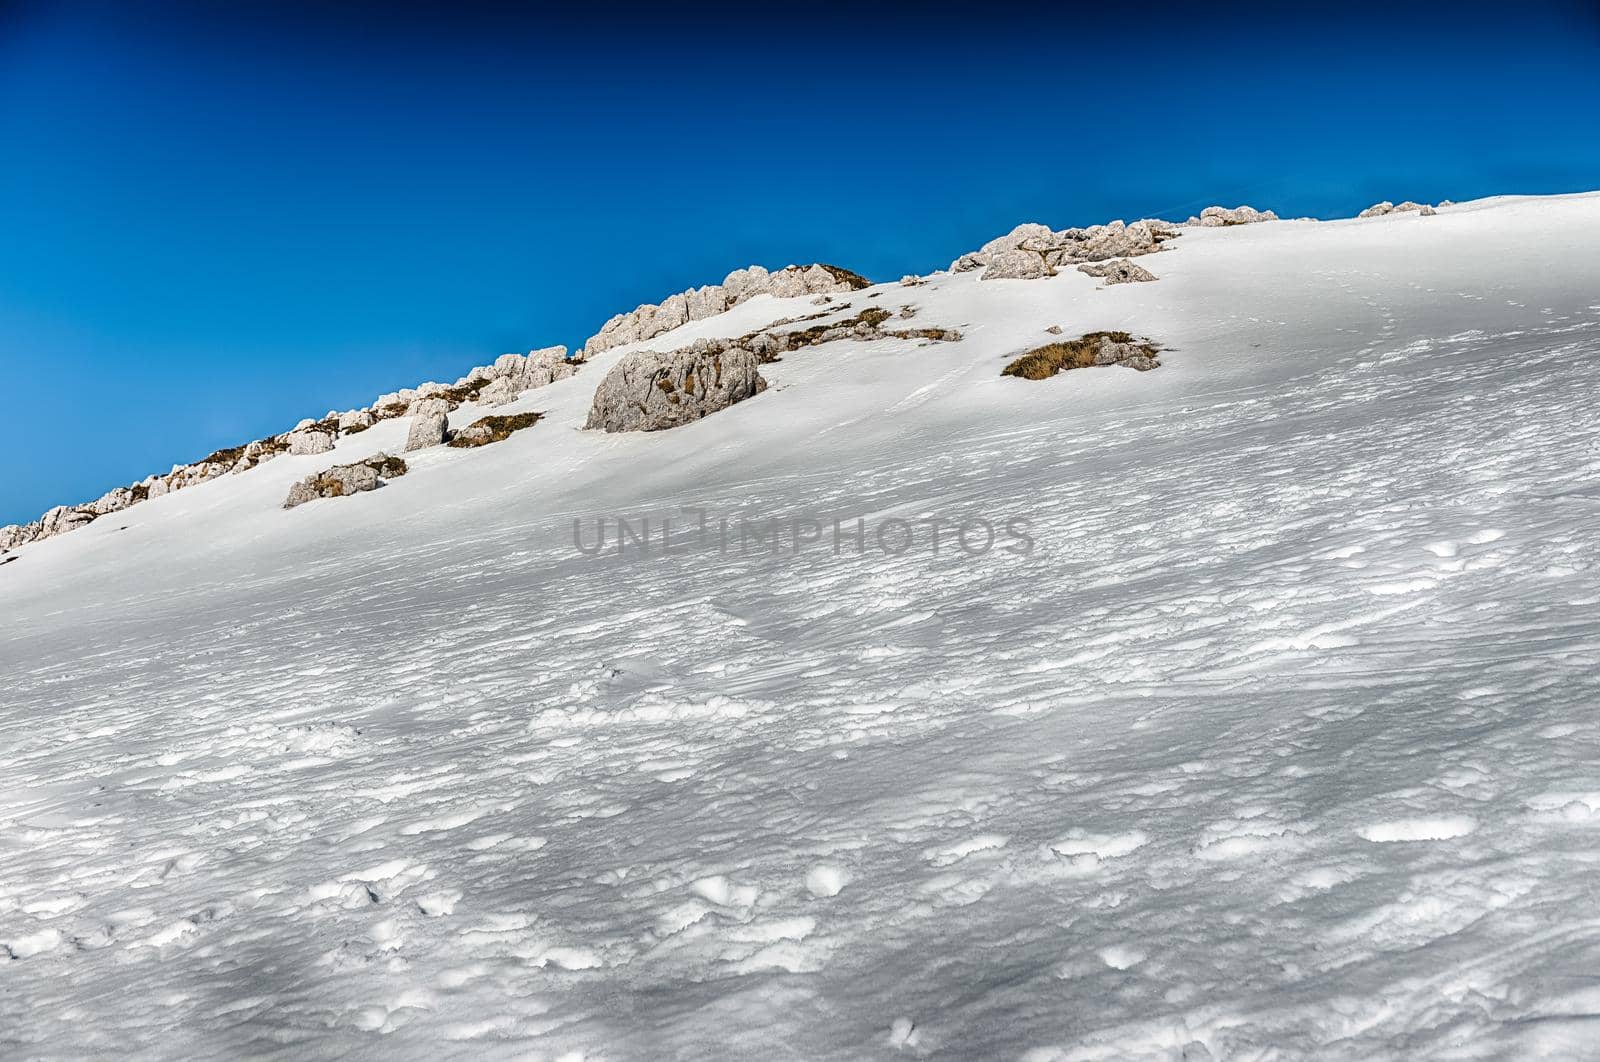 Scenic winter landscape with snow covered mountains, Campocatino, Italy by marcorubino